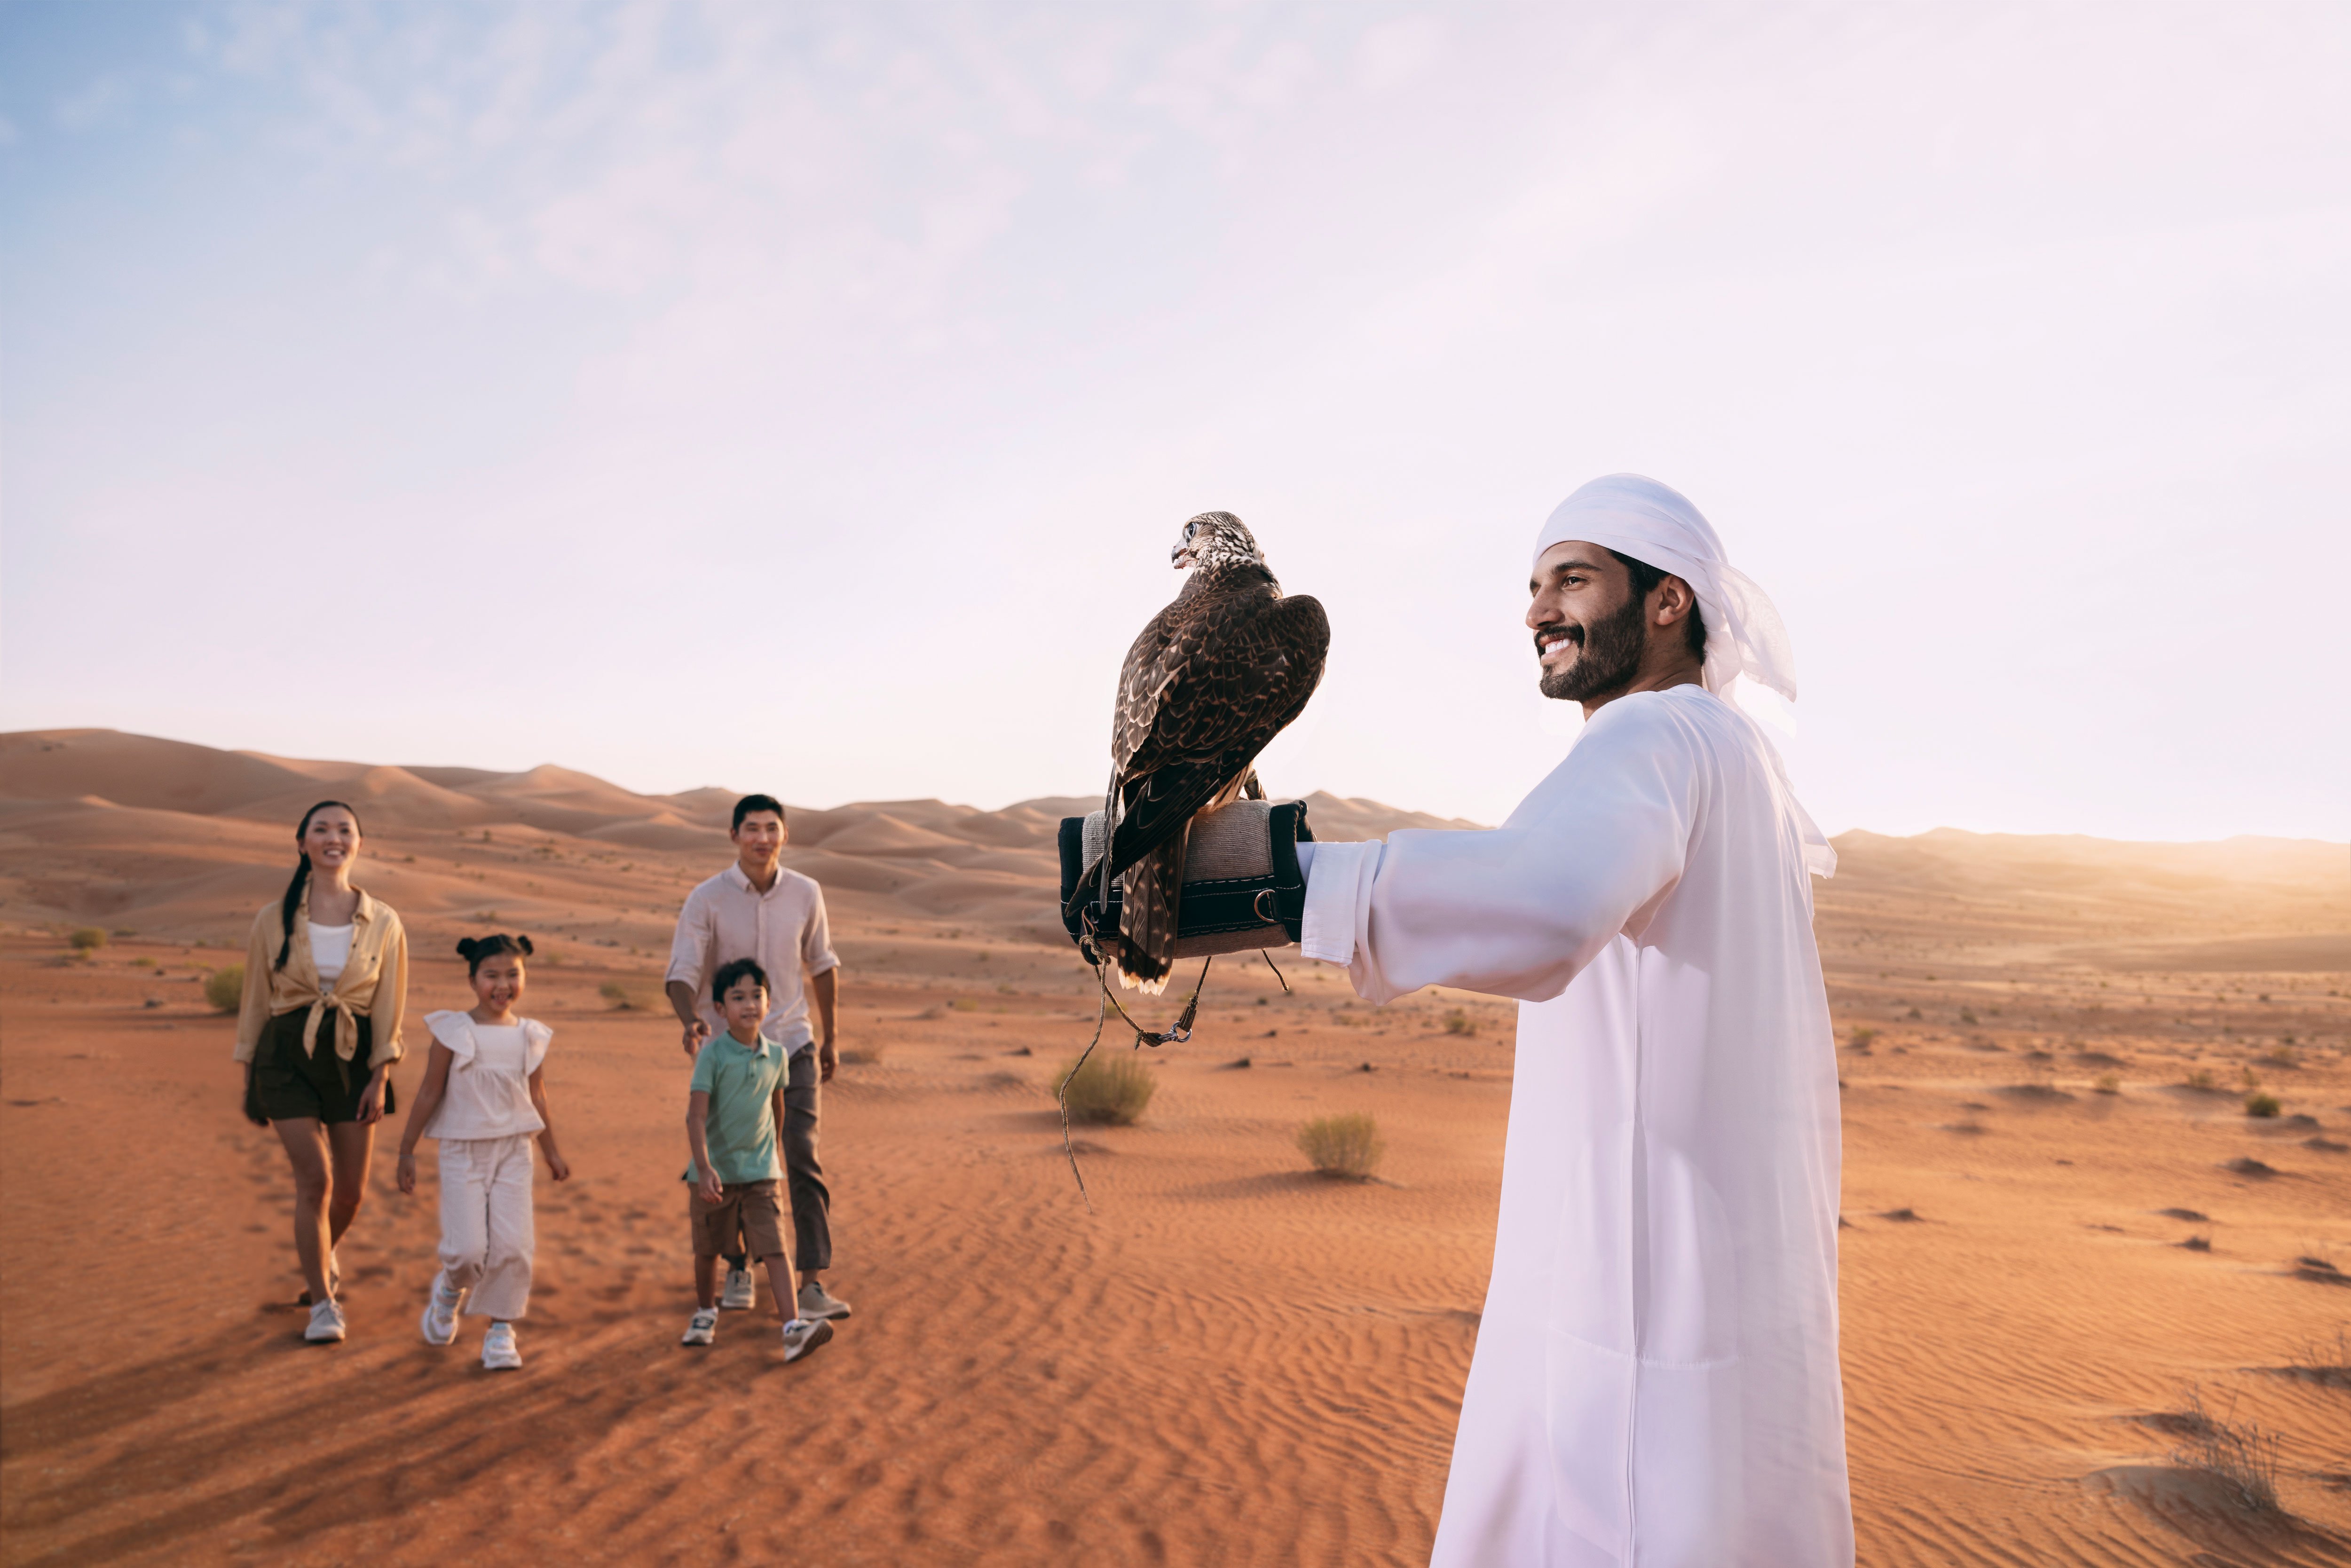 Local guide showing a group of tourists a falcon on his arm in Abu Dhabi desert